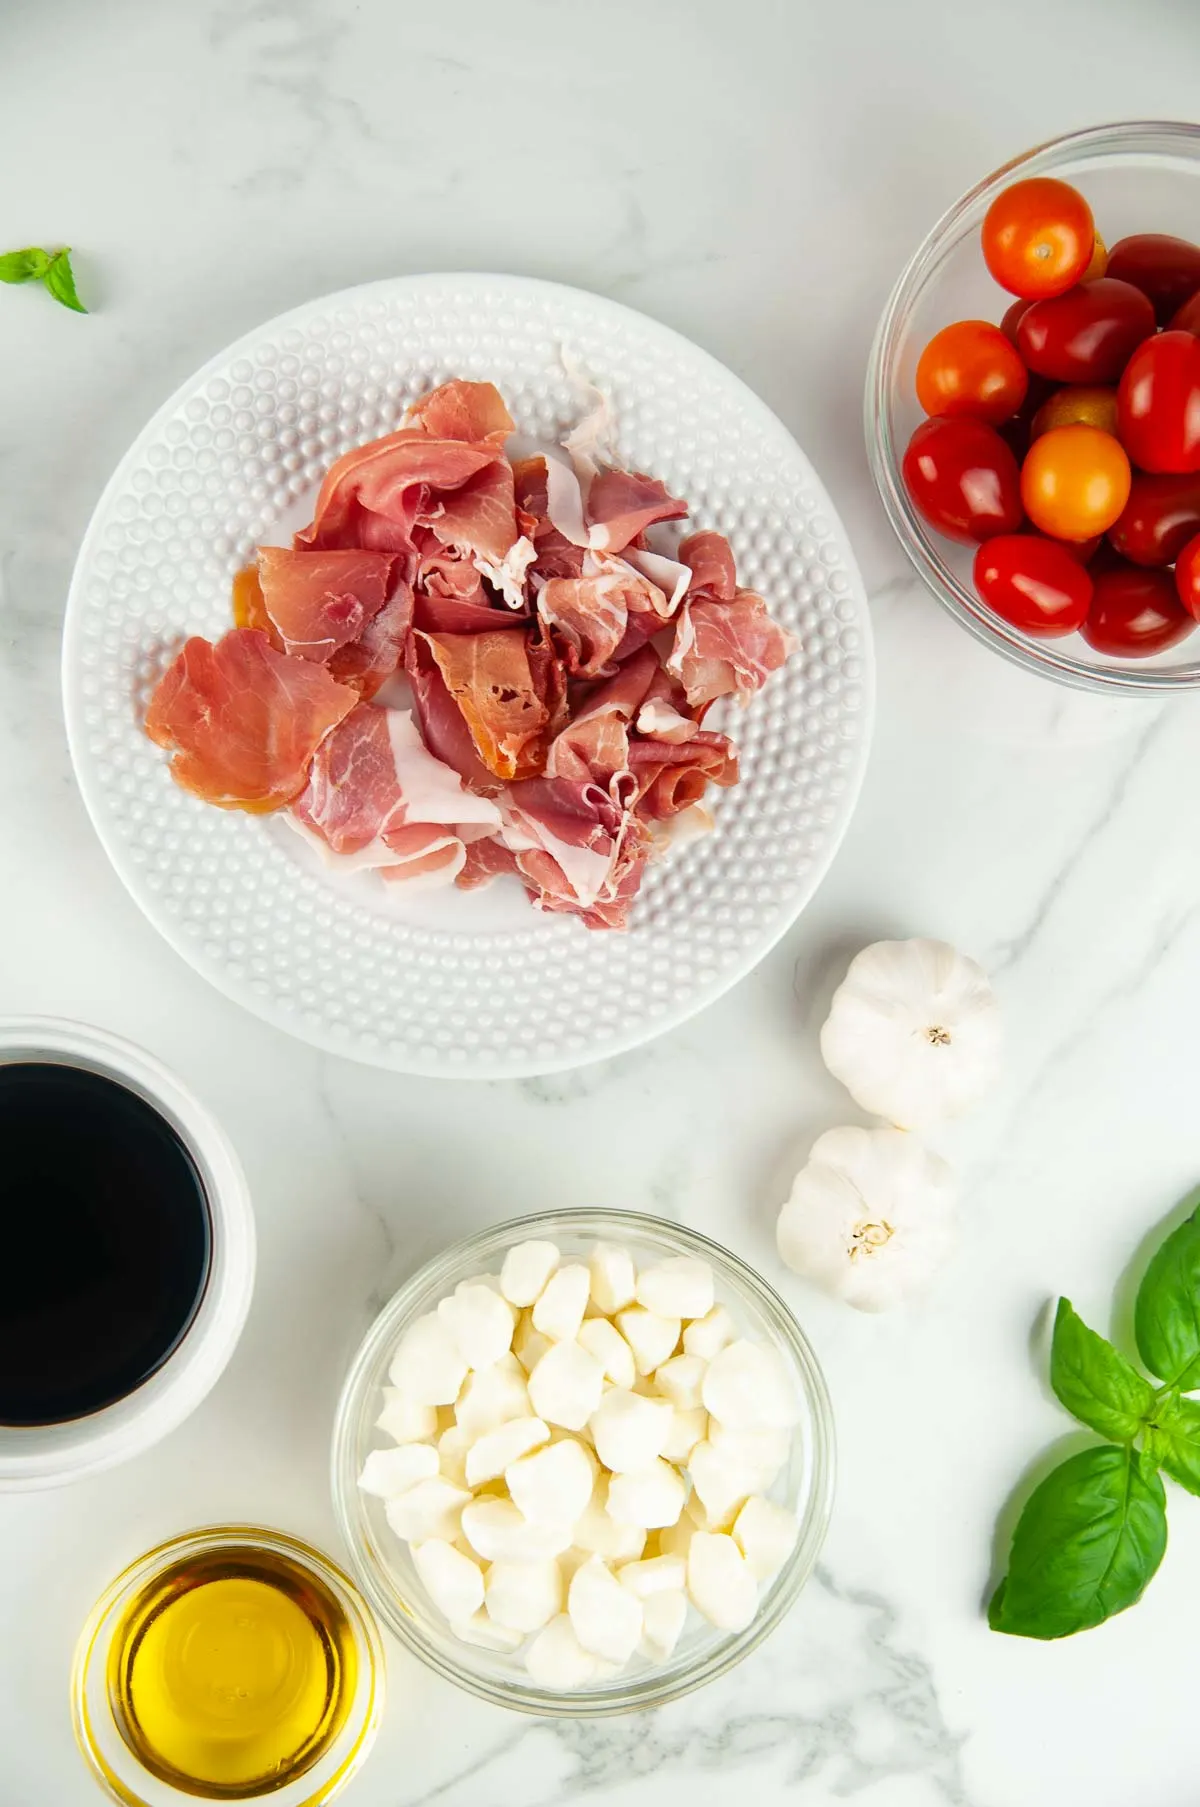 Ingredients for Prosciutto Caprese Skewers: Cherry Tomatoes, Prosciutto, Mozzarella, Balsamic, and Fresh Basil